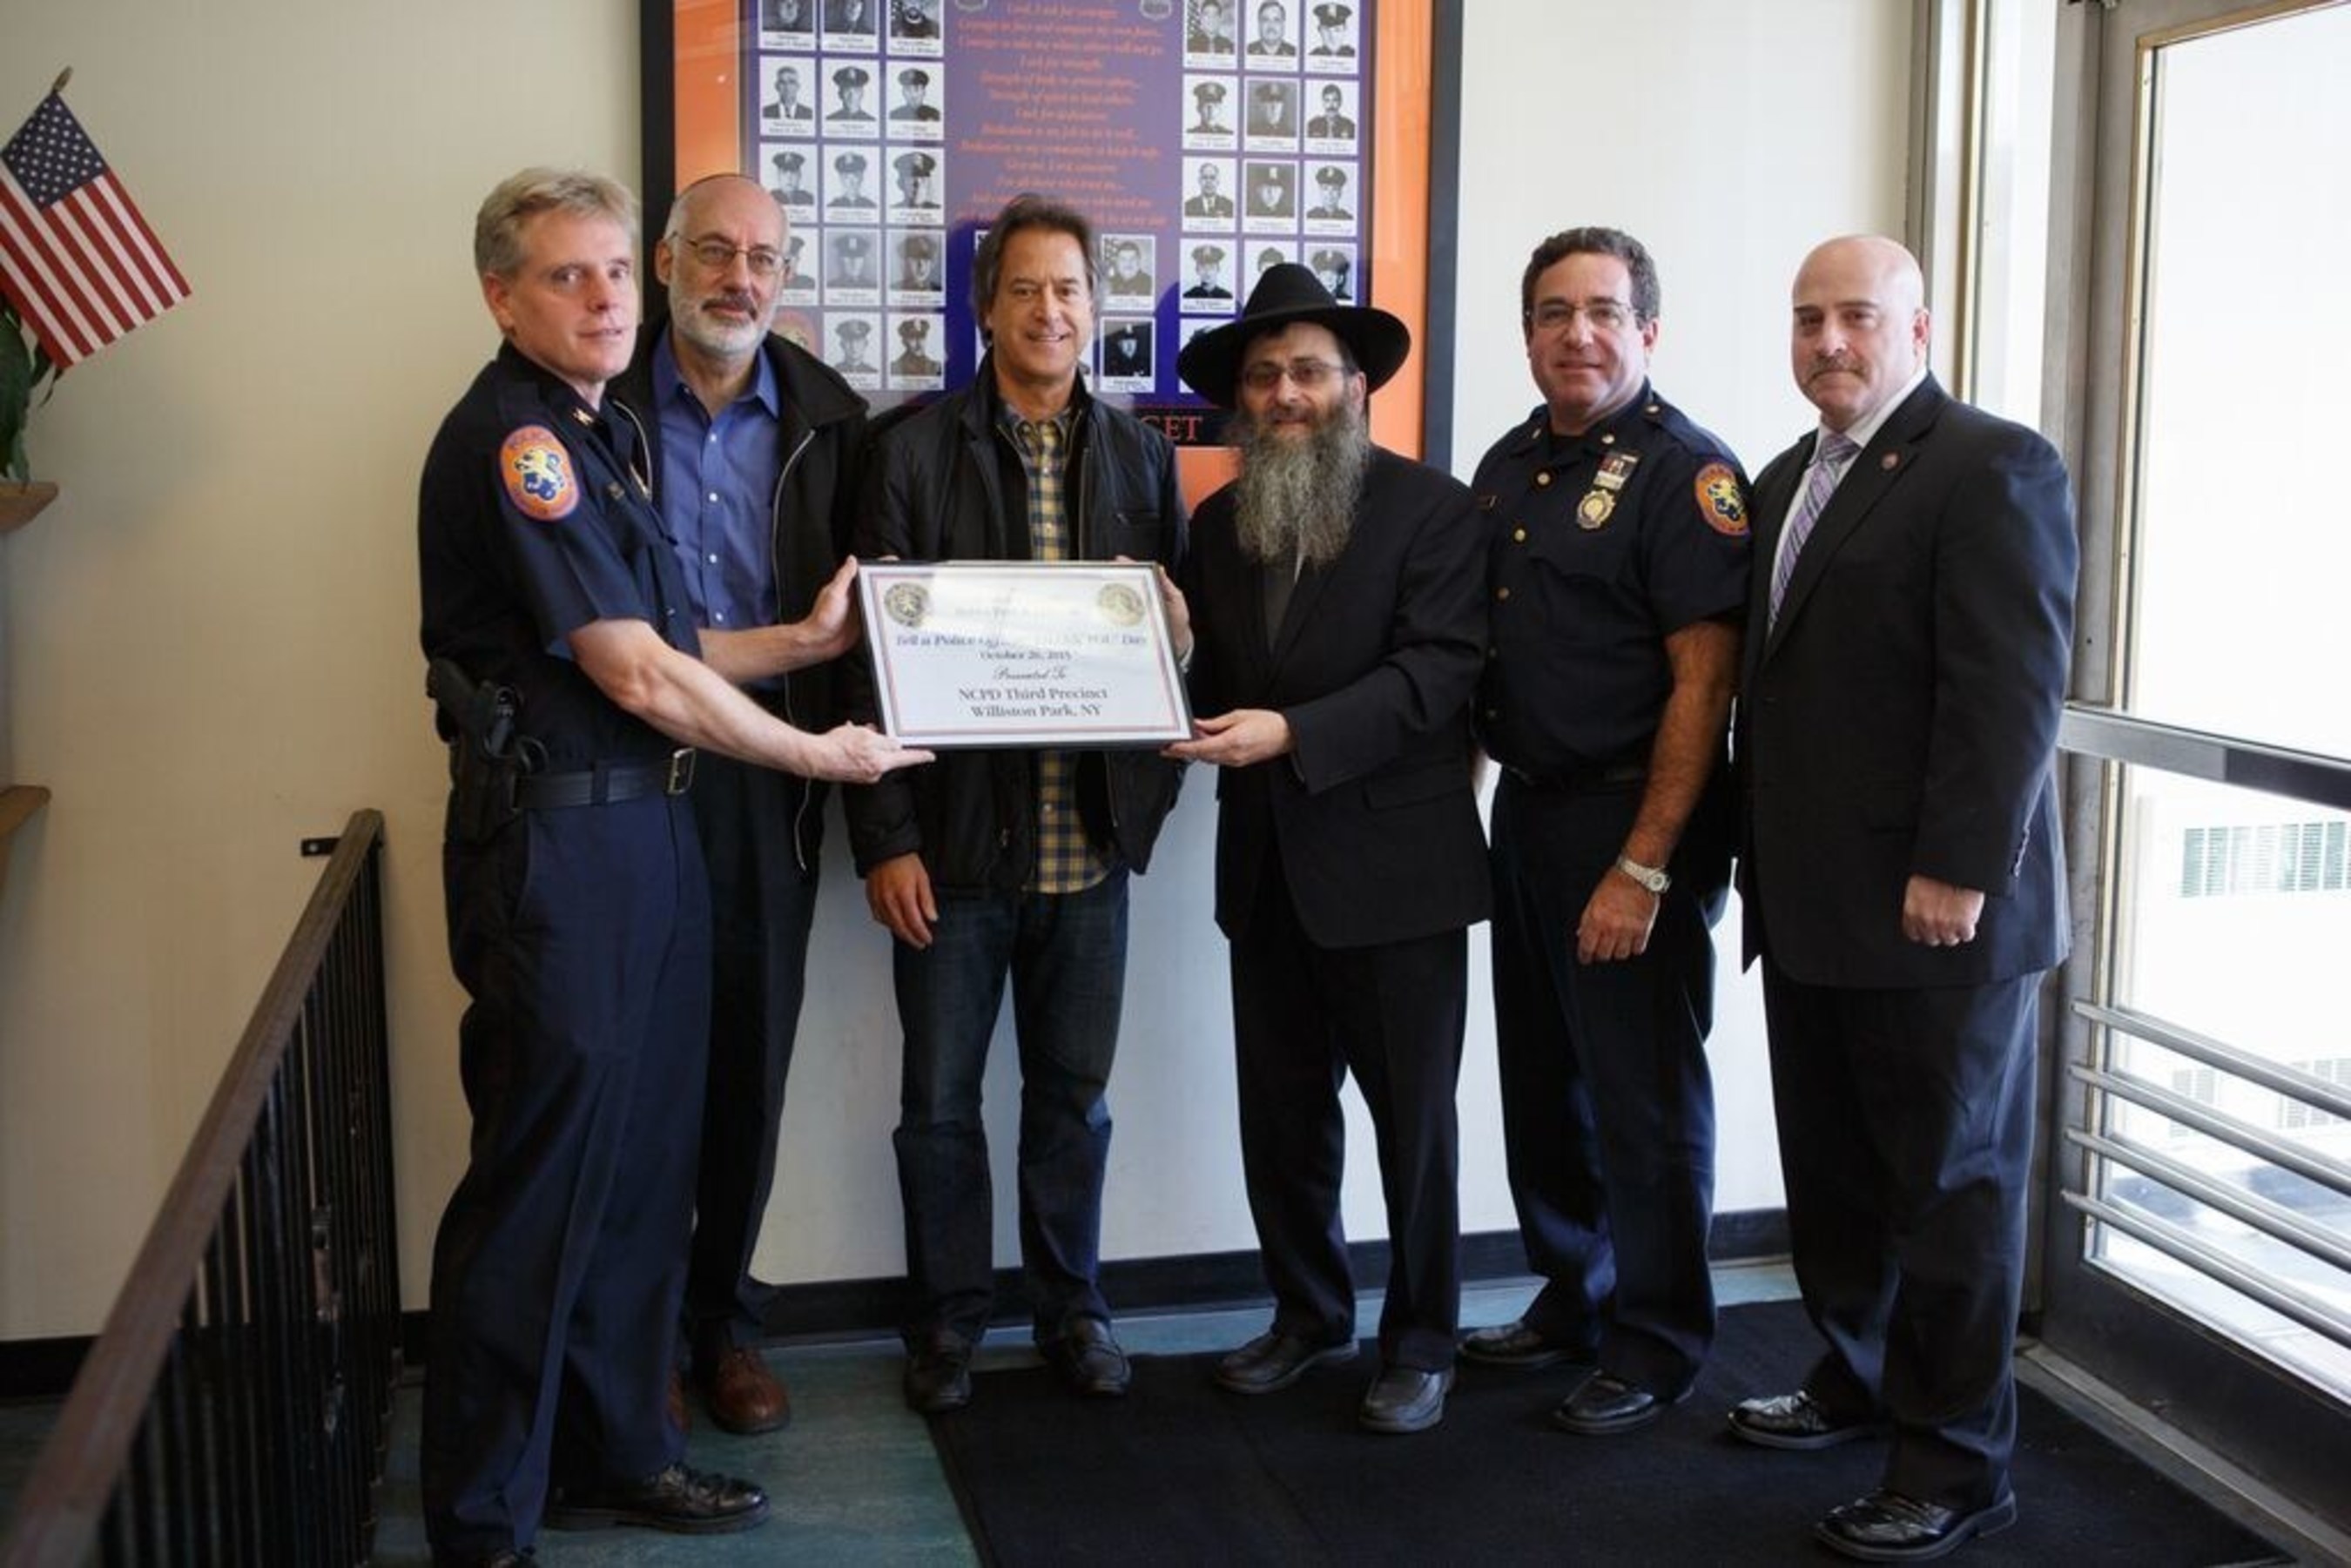 Rabbi Perl & friends journeyed to all the Nassau County Long Island Police Precincts to show appreciation and recognition to all police officers in a special 'Thank You Day'